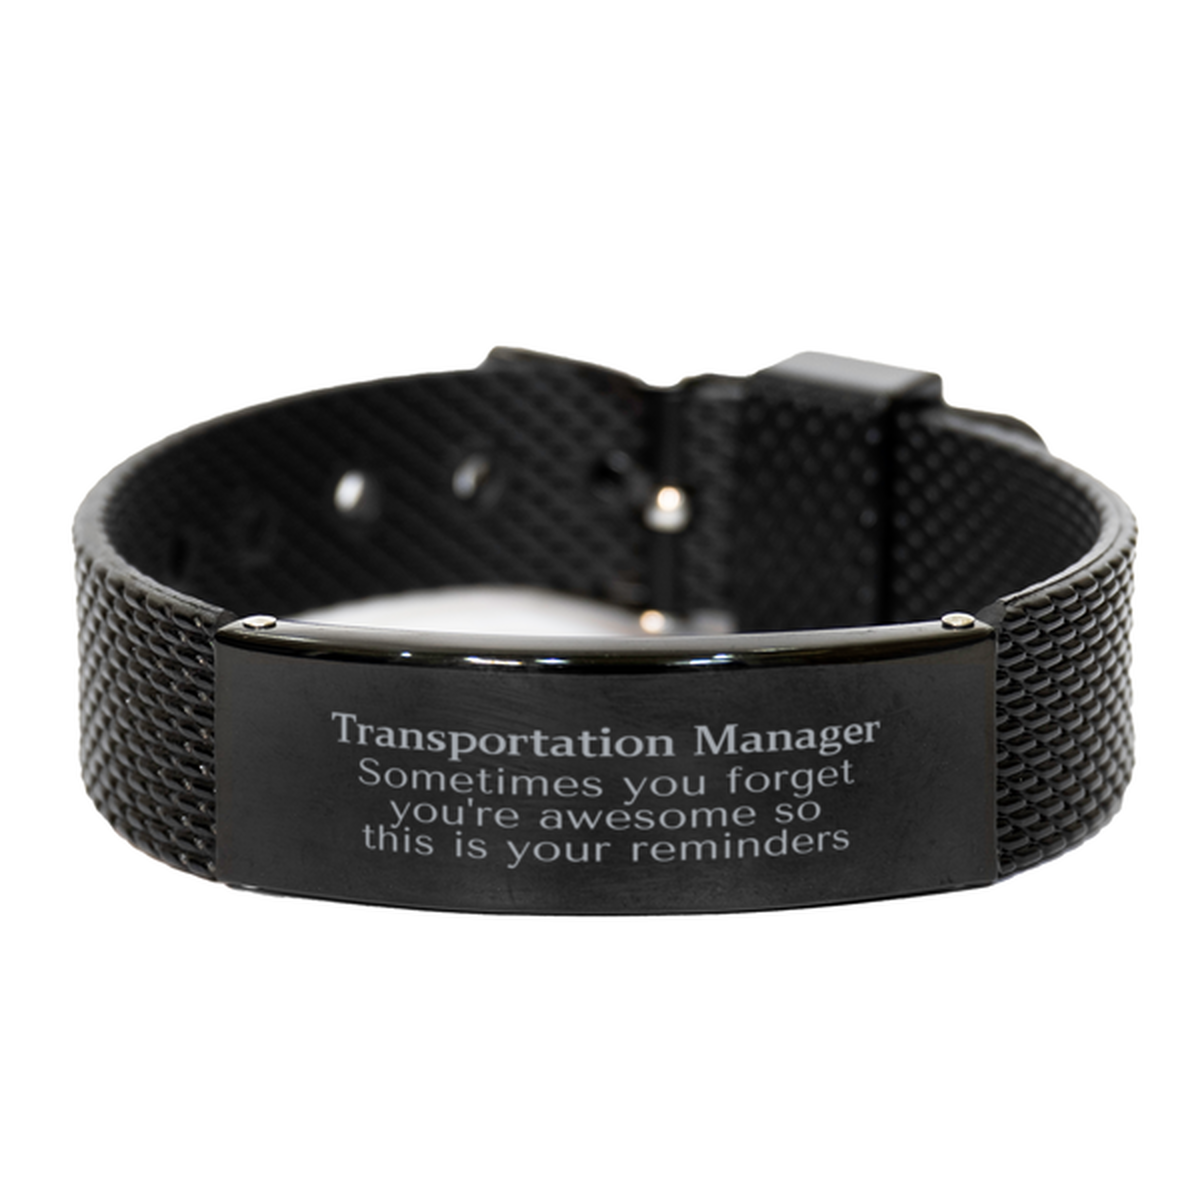 Sentimental Transportation Manager Black Shark Mesh Bracelet, Transportation Manager Sometimes you forget you're awesome so this is your reminders, Graduation Christmas Birthday Gifts for Transportation Manager, Men, Women, Coworkers